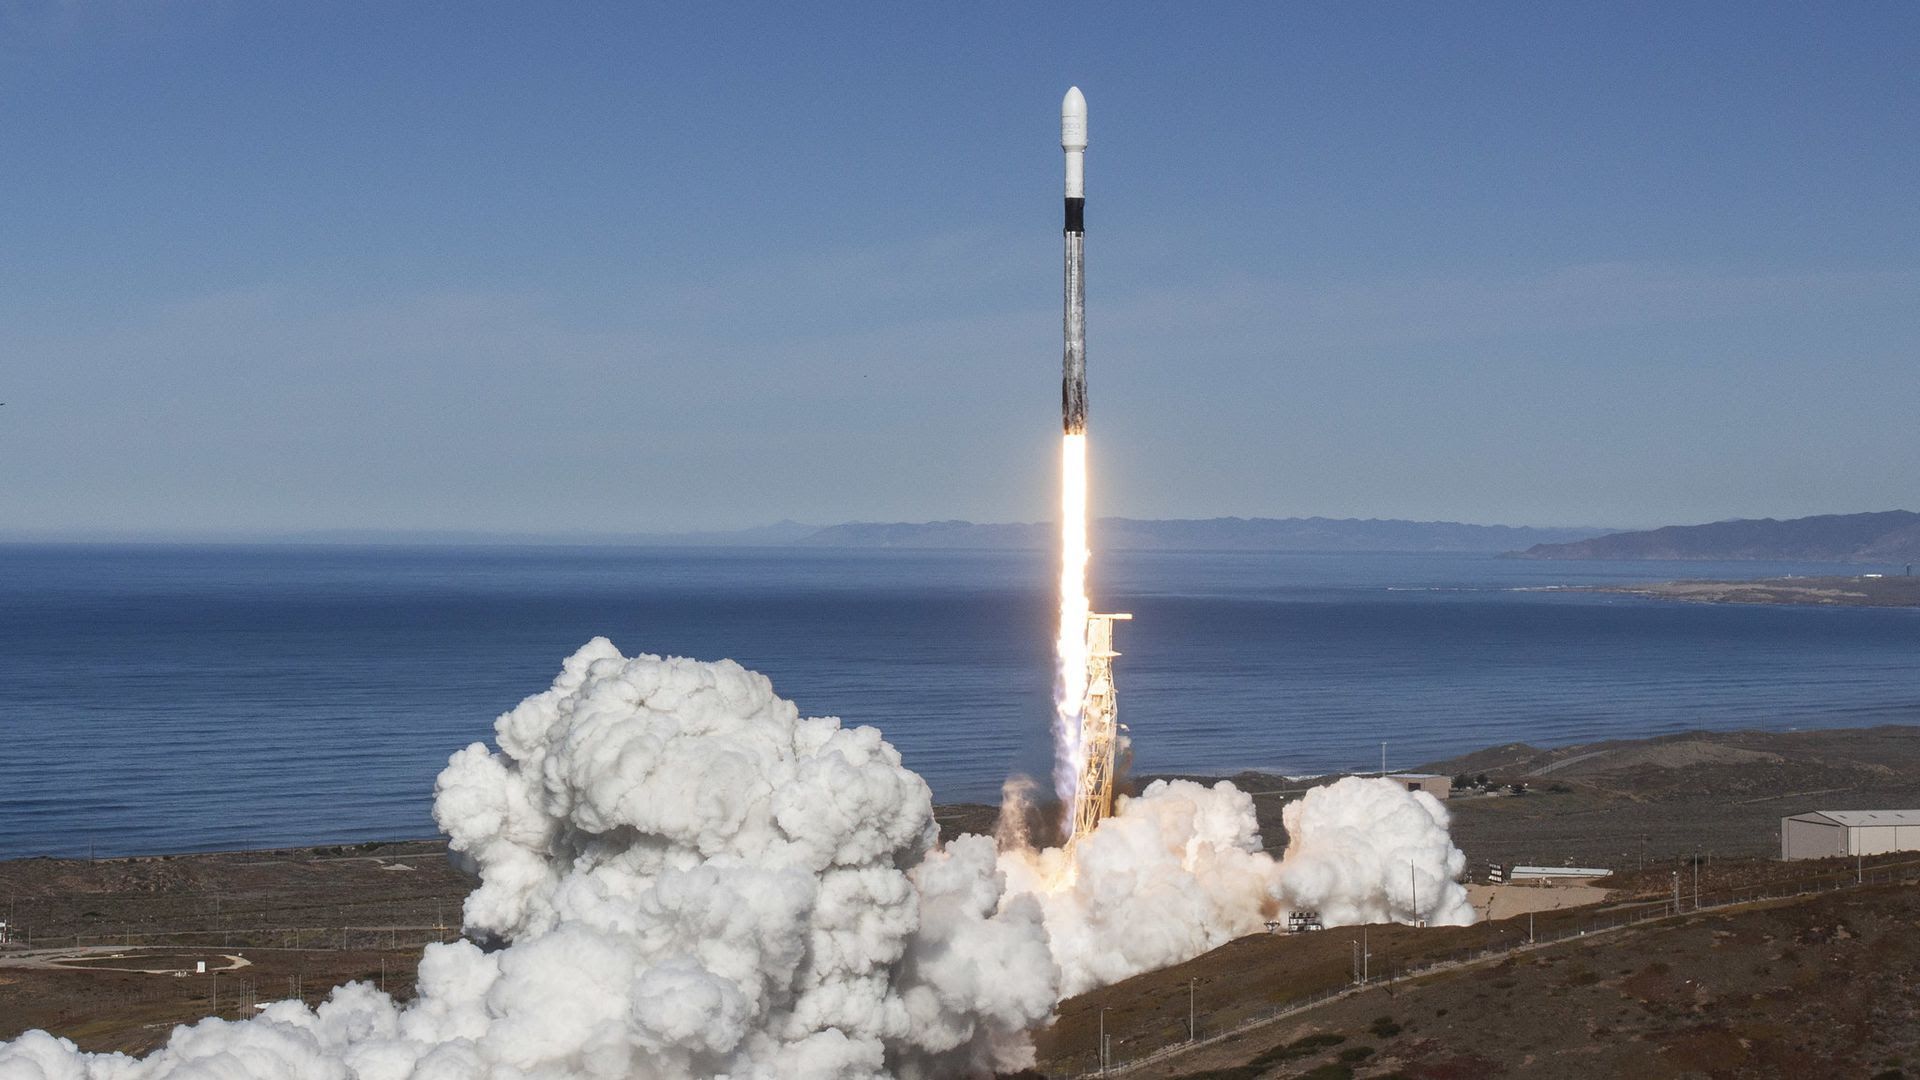 A Falcon 9 rocket launch in 2018. Photo: SpaceX